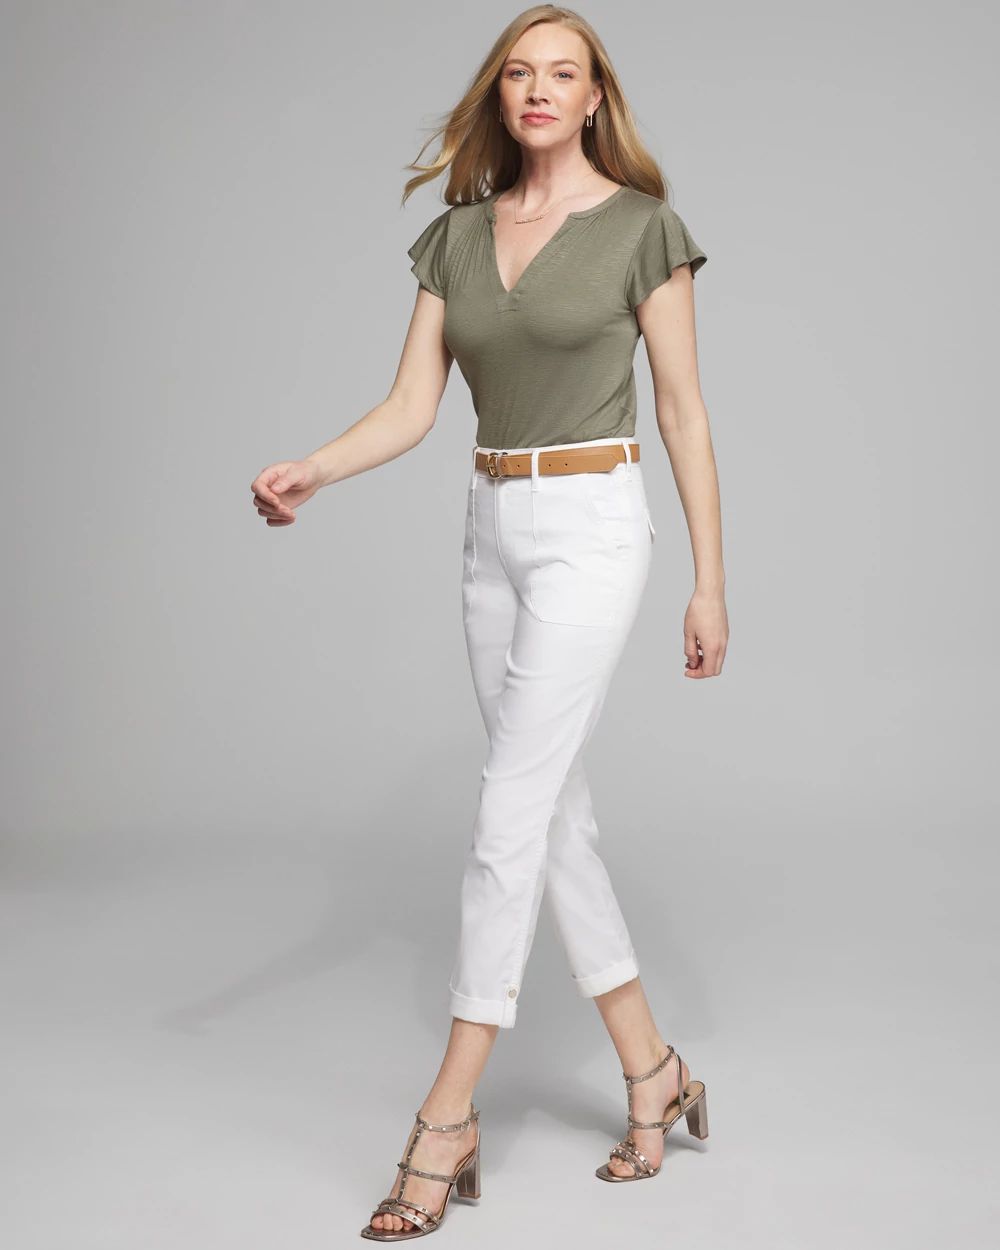 Outlet WHBM Notch Neck Ruffle Tee click to view larger image.